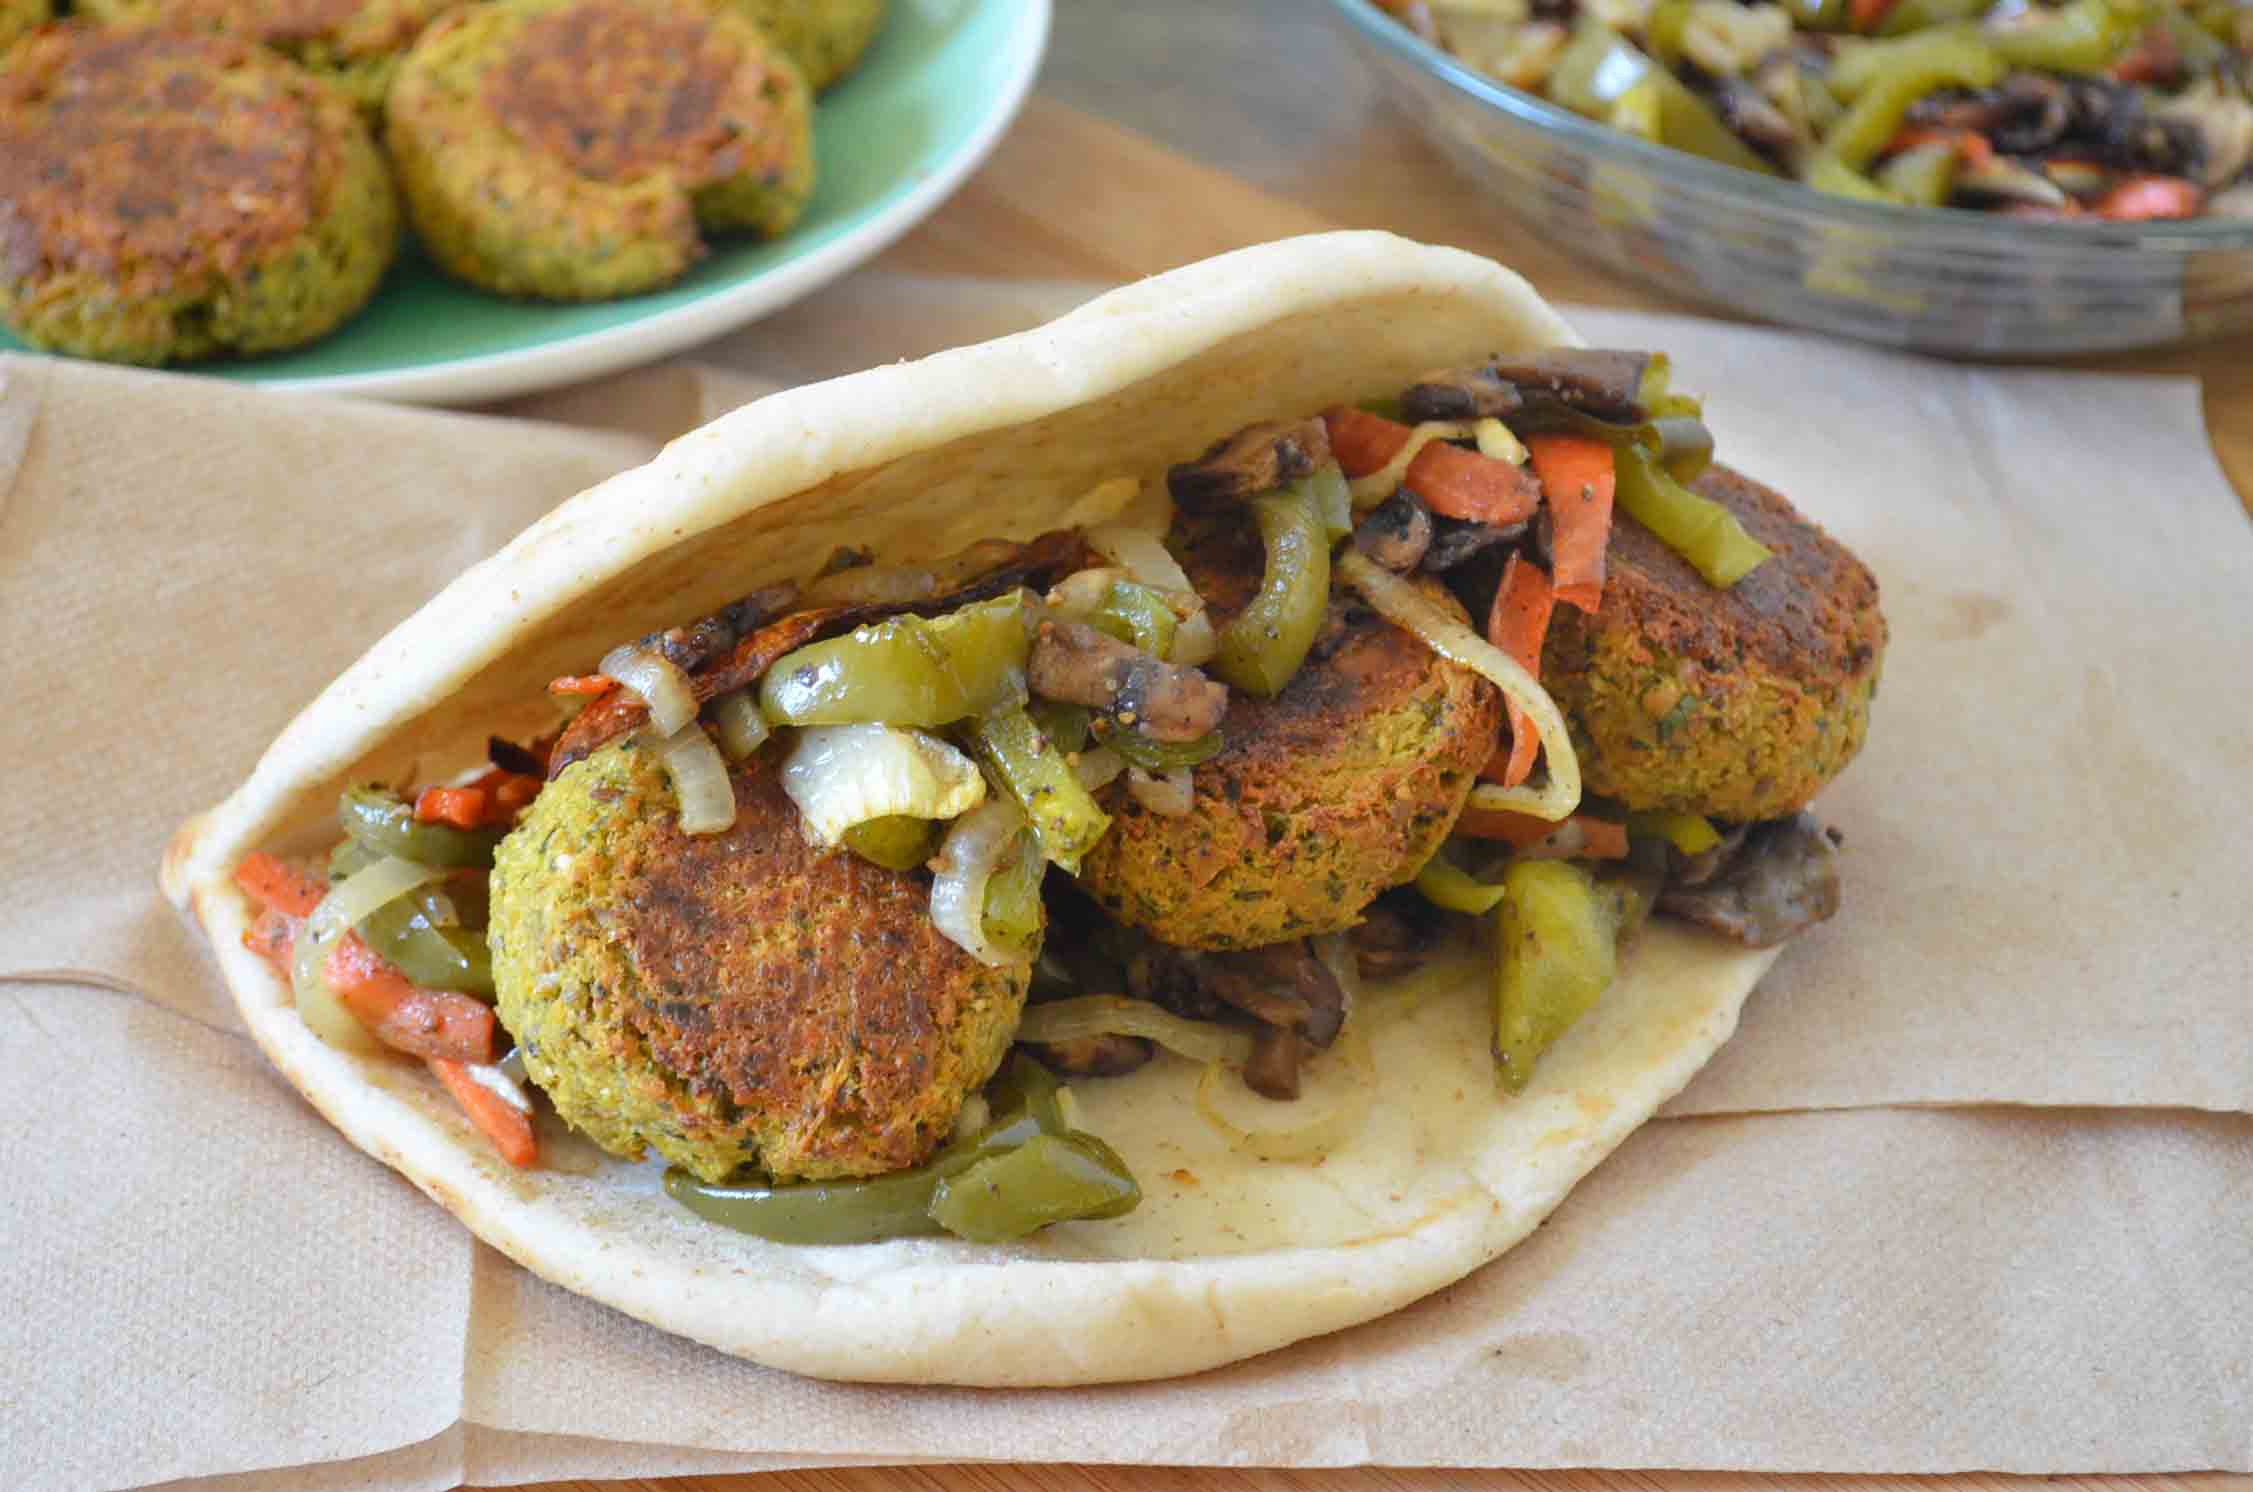 Pita Sandwich With Falafel And Vegetables Recipe by Archana's Kitchen